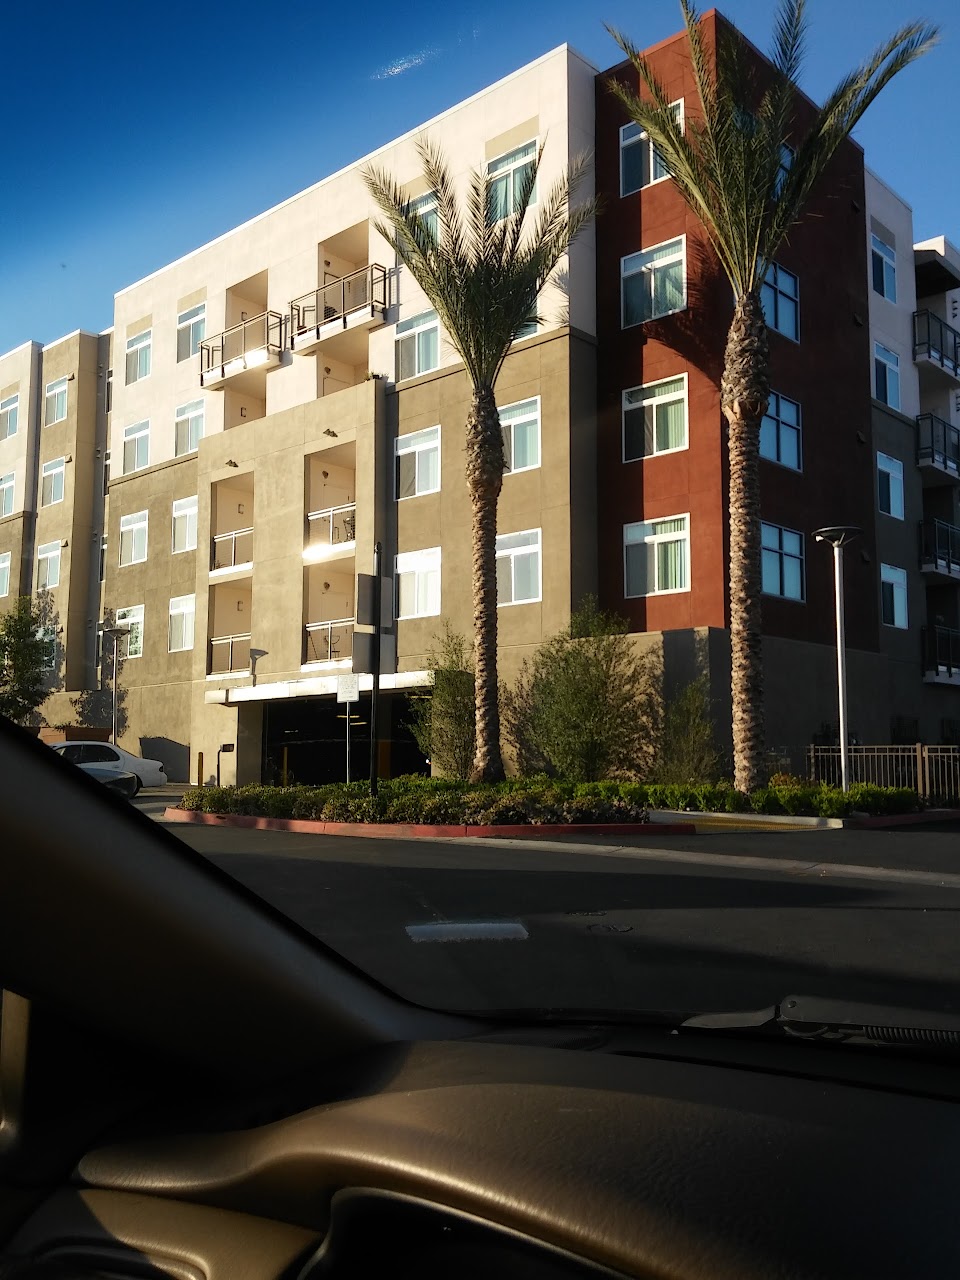 Photo of THE EXCHANGE AT GATEWAY APARTMENTS. Affordable housing located at 10562 SANTA FE DRIVE EL MONTE, CA 91731